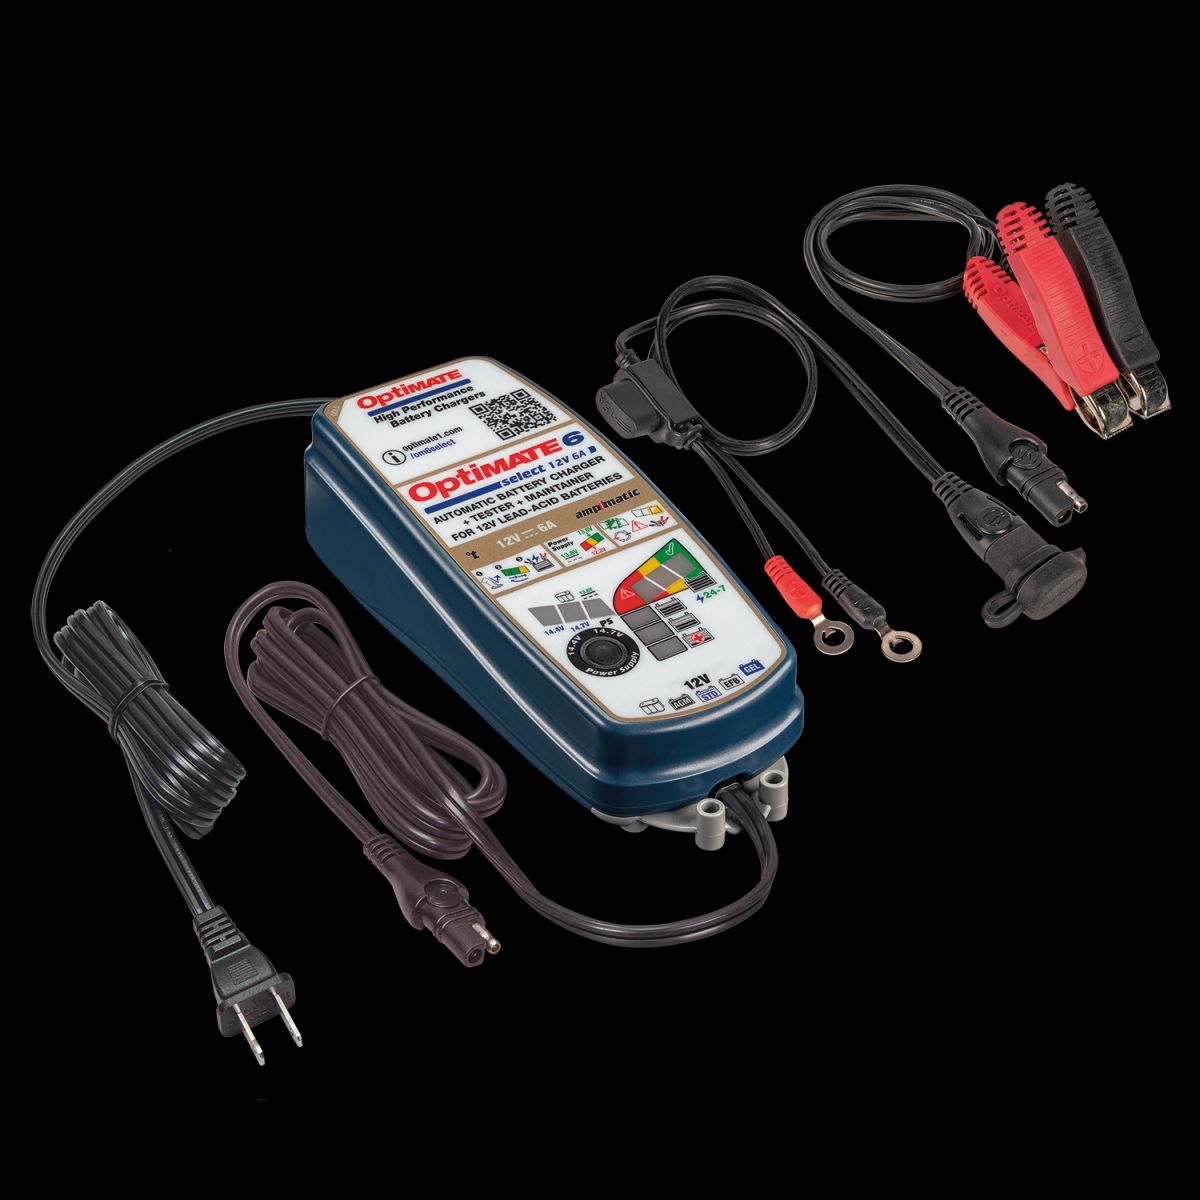 OptiMate 6 Ampmatic Motorcycle Battery Charger